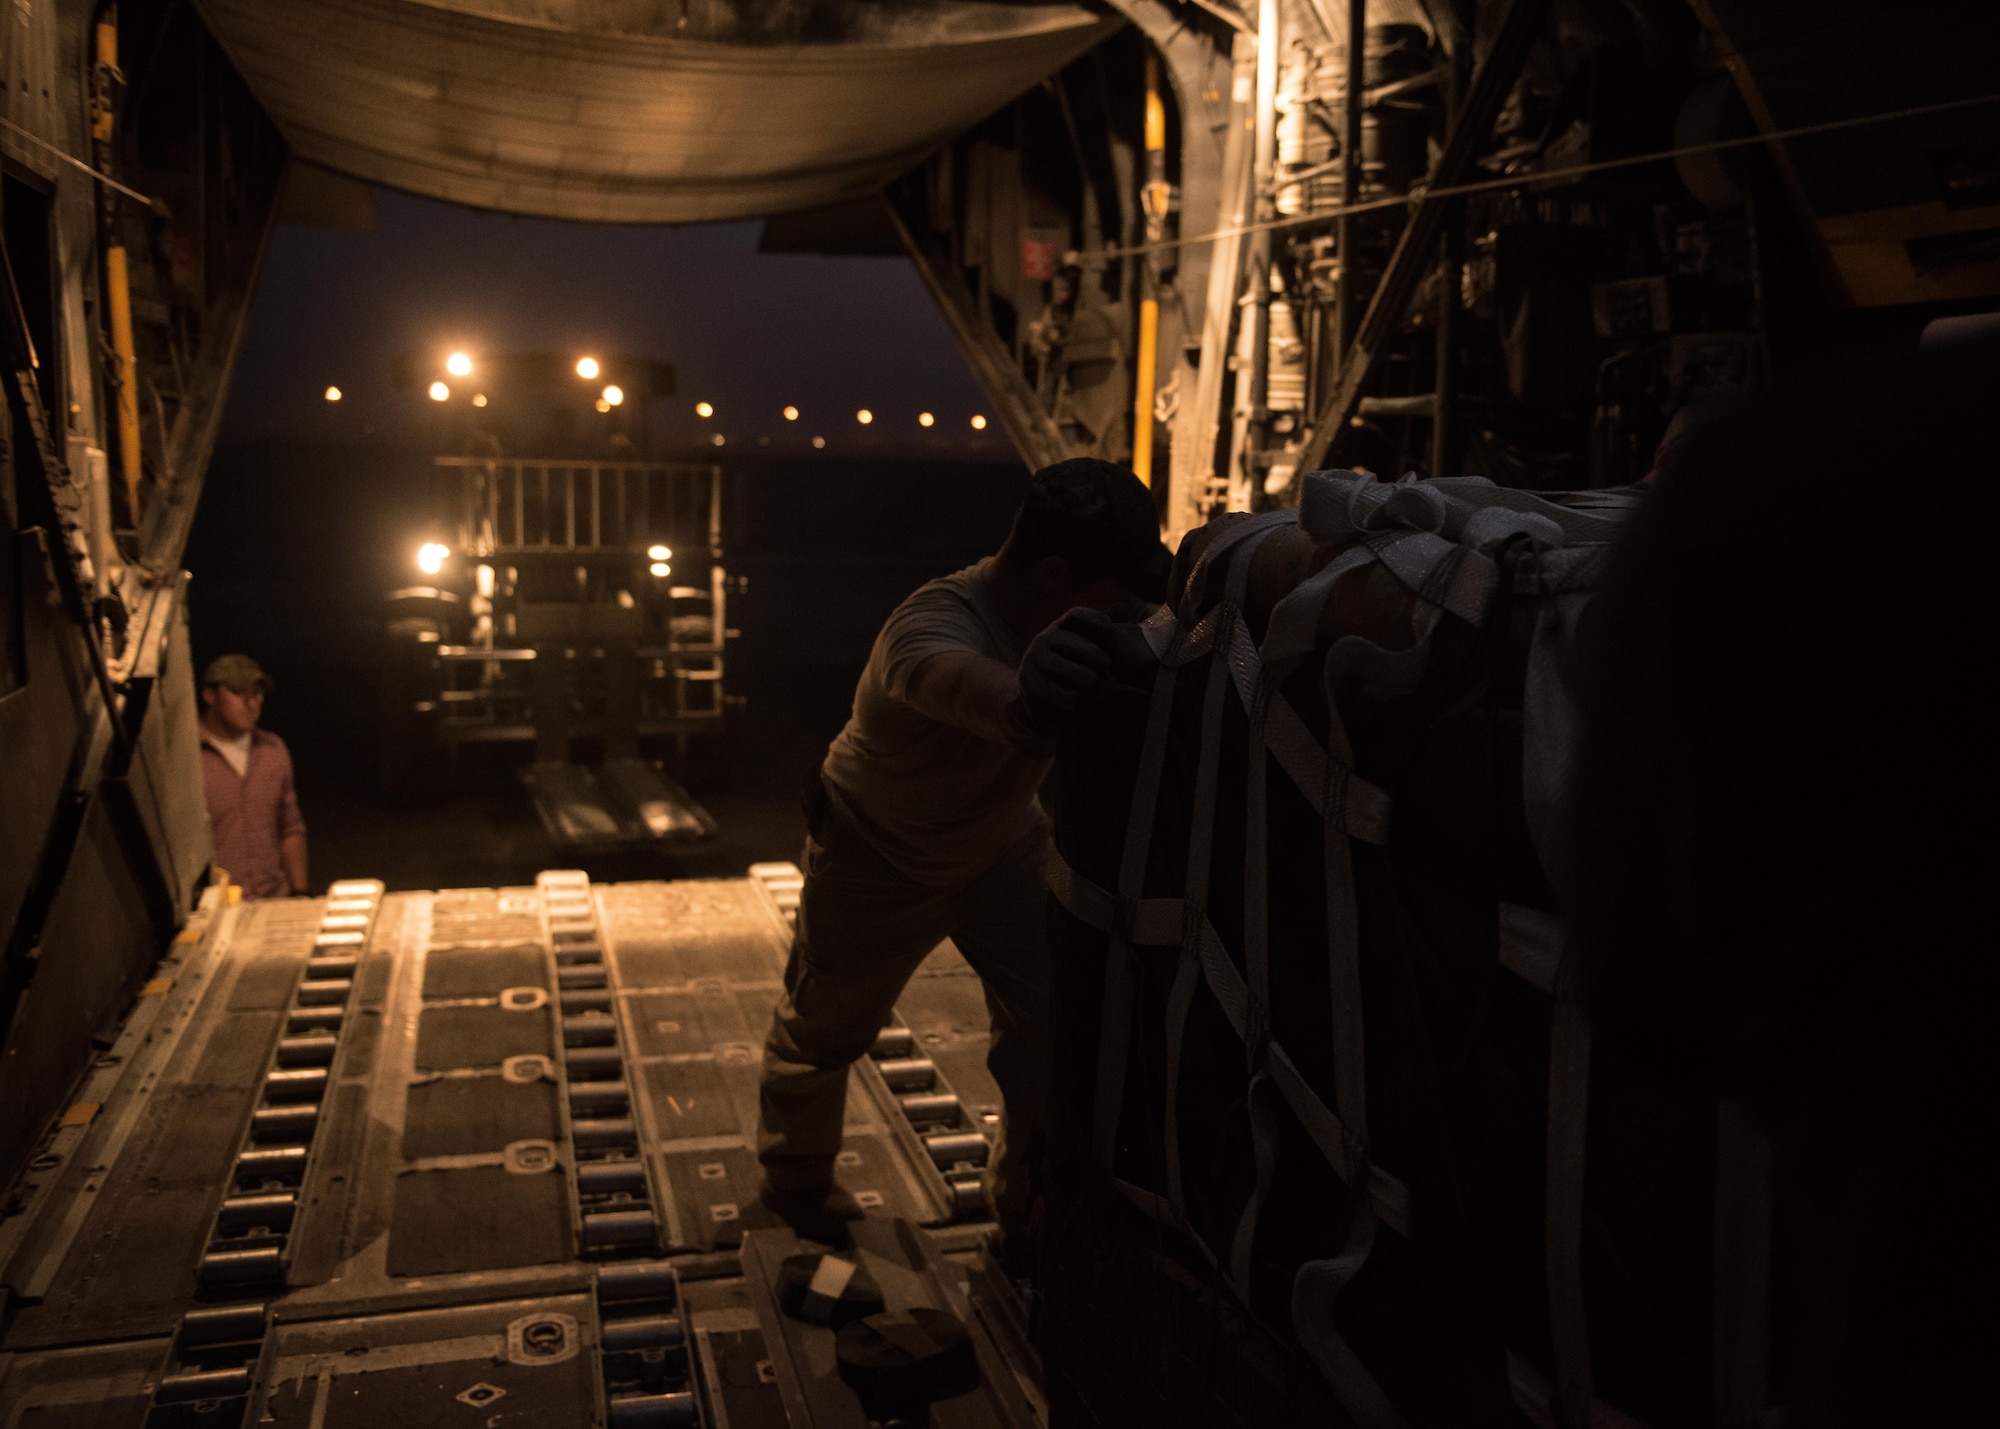 An U.S. Air Force loadmaster loads a C-130 aircraft with supply bundles in preparation for an airdrop mission at an undisclosed location in Southwest Asia, Sept. 10, 2017. Airdrop bundles are rigged within specific guidelines to ensure the cargo properly exits the aircraft, the parachute properly deploys and the bundle lands intact on its target. (U.S. Air Force photo by Tech. Sgt. Jonathan Hehnly)